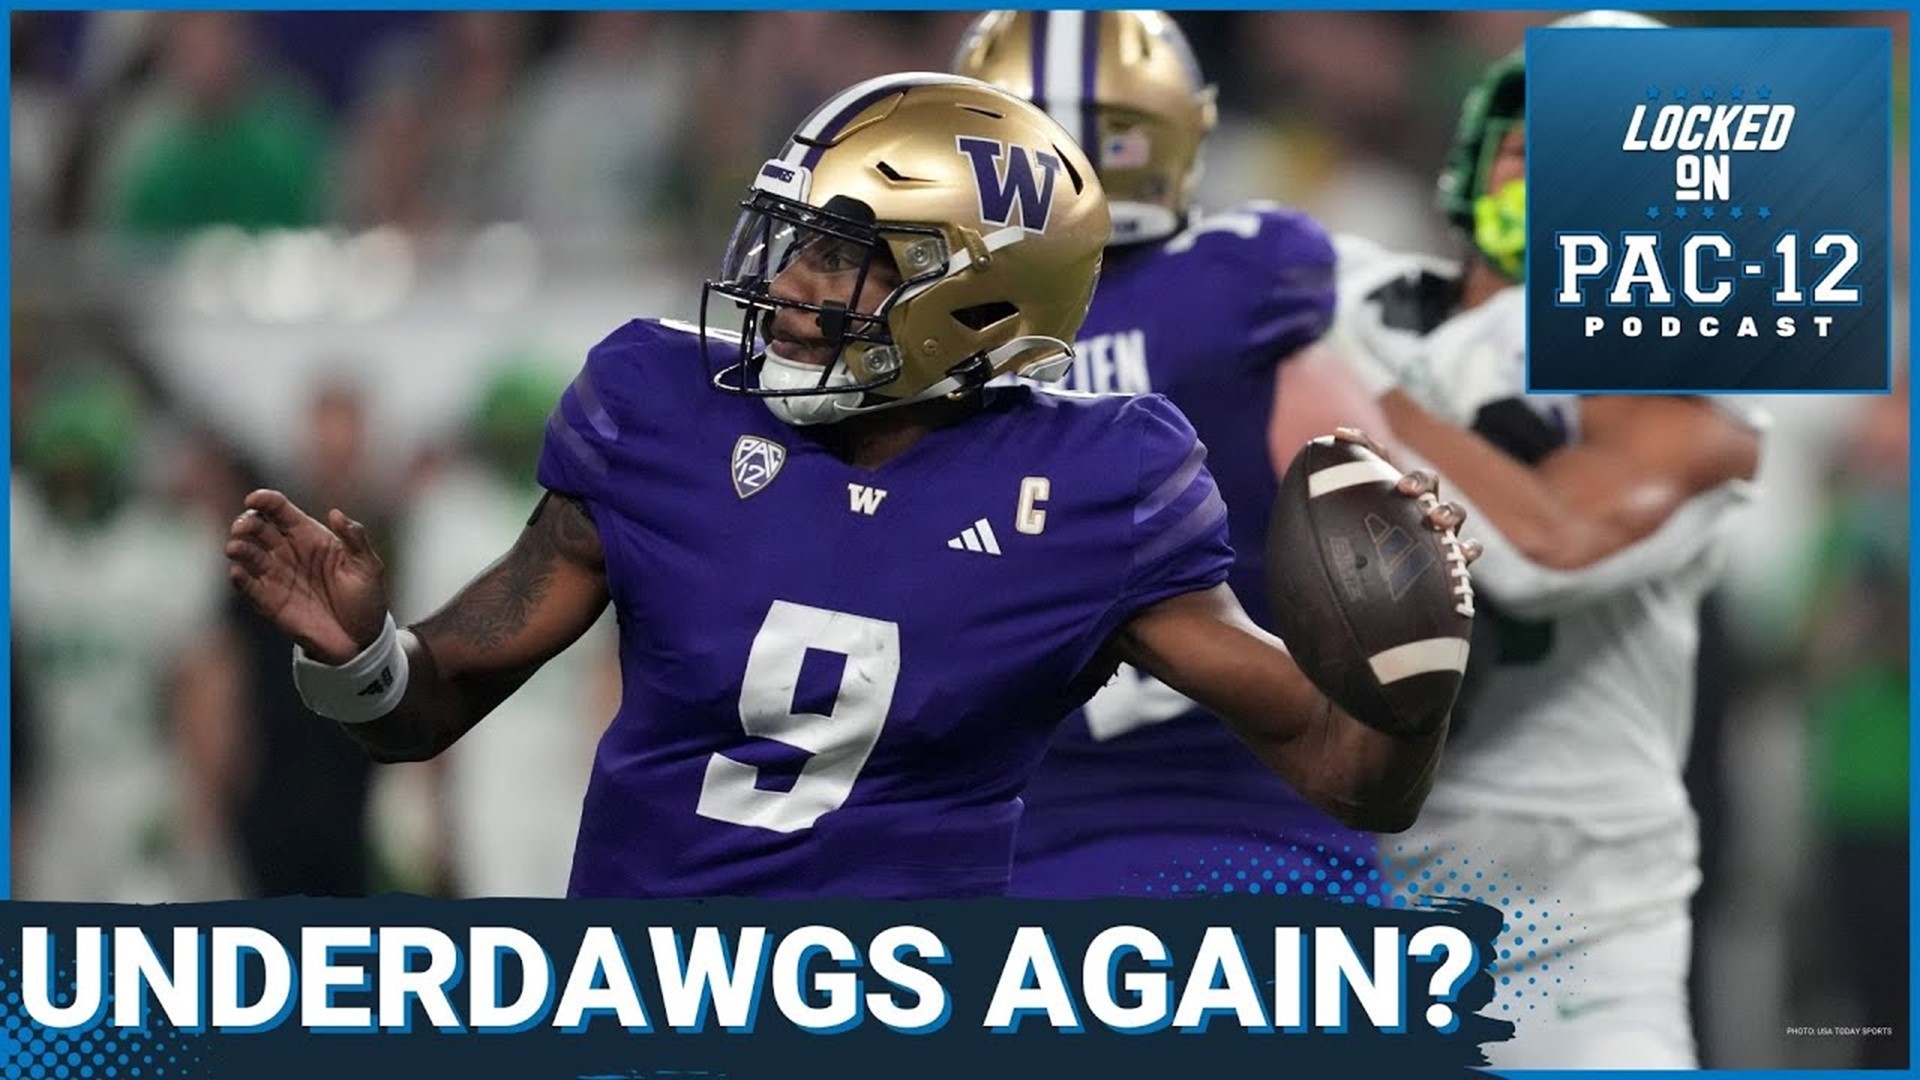 Washington beat Oregon 34-31 for their second win against the Ducks this season, locking up a spot in the College Football Playoff.